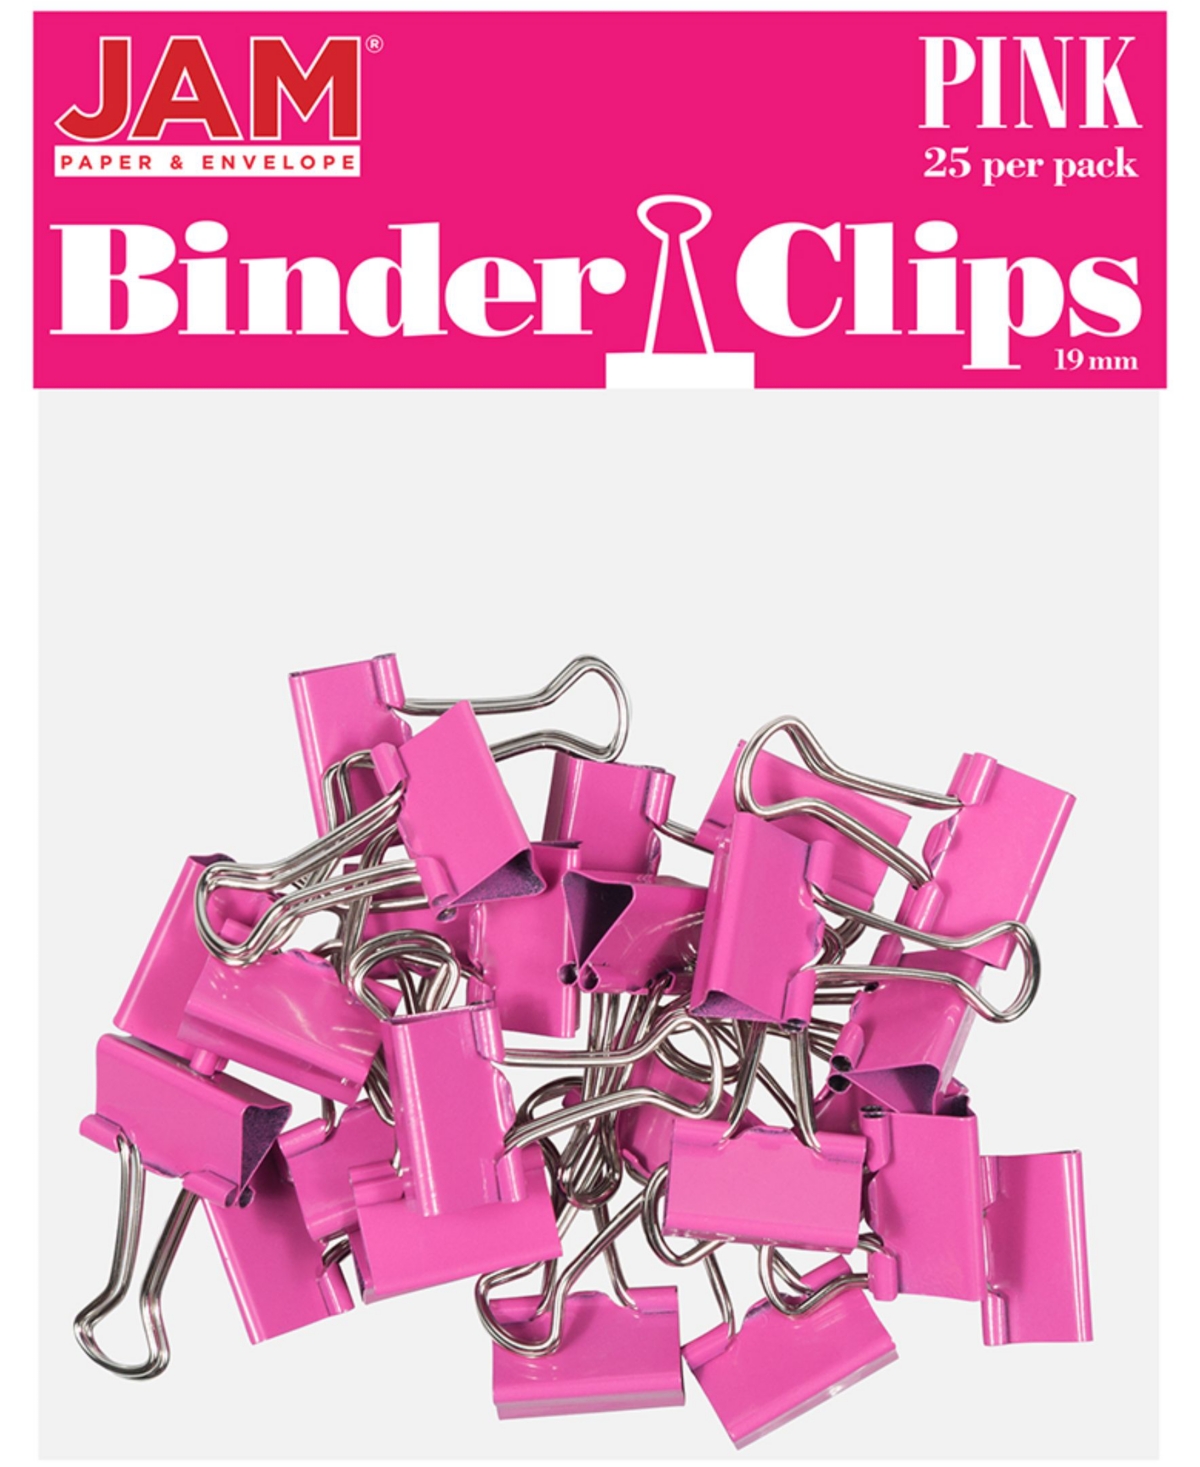 Colorful Binder Clips - Small - 0.75", 19 Millimeter - 25 Per Pack - Pink